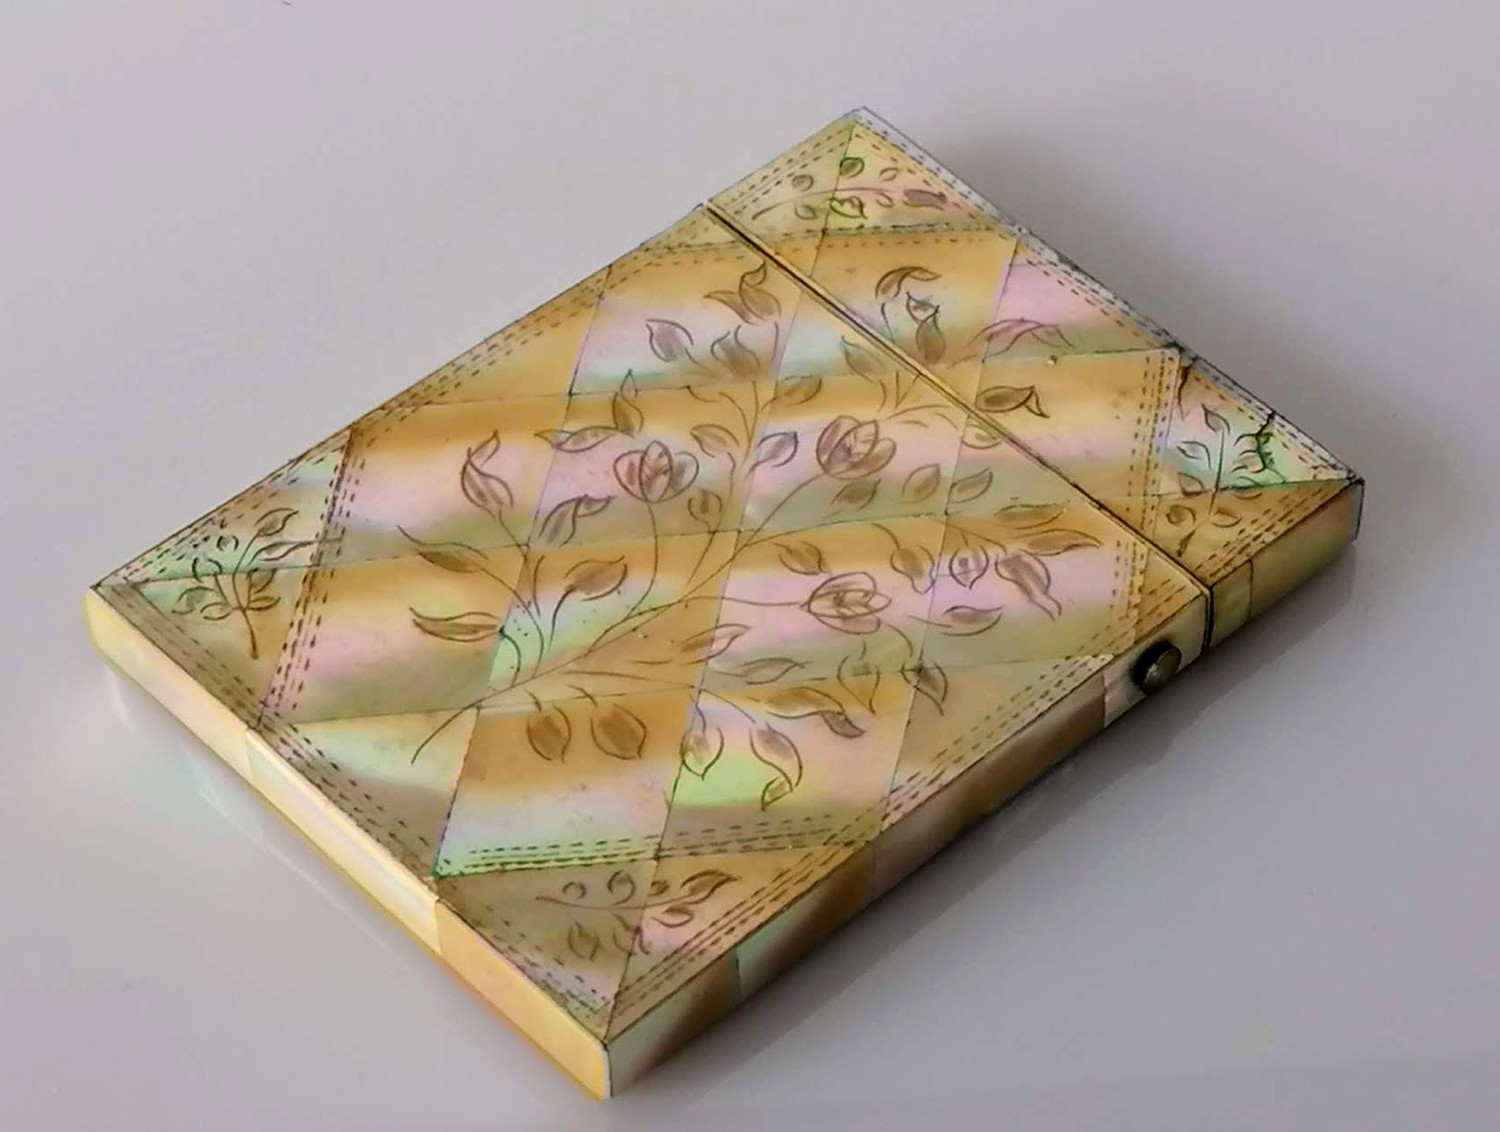 A mother-of-pearl oblong card case with hinged lid and floral decoration, 10 x 8 cm, in good